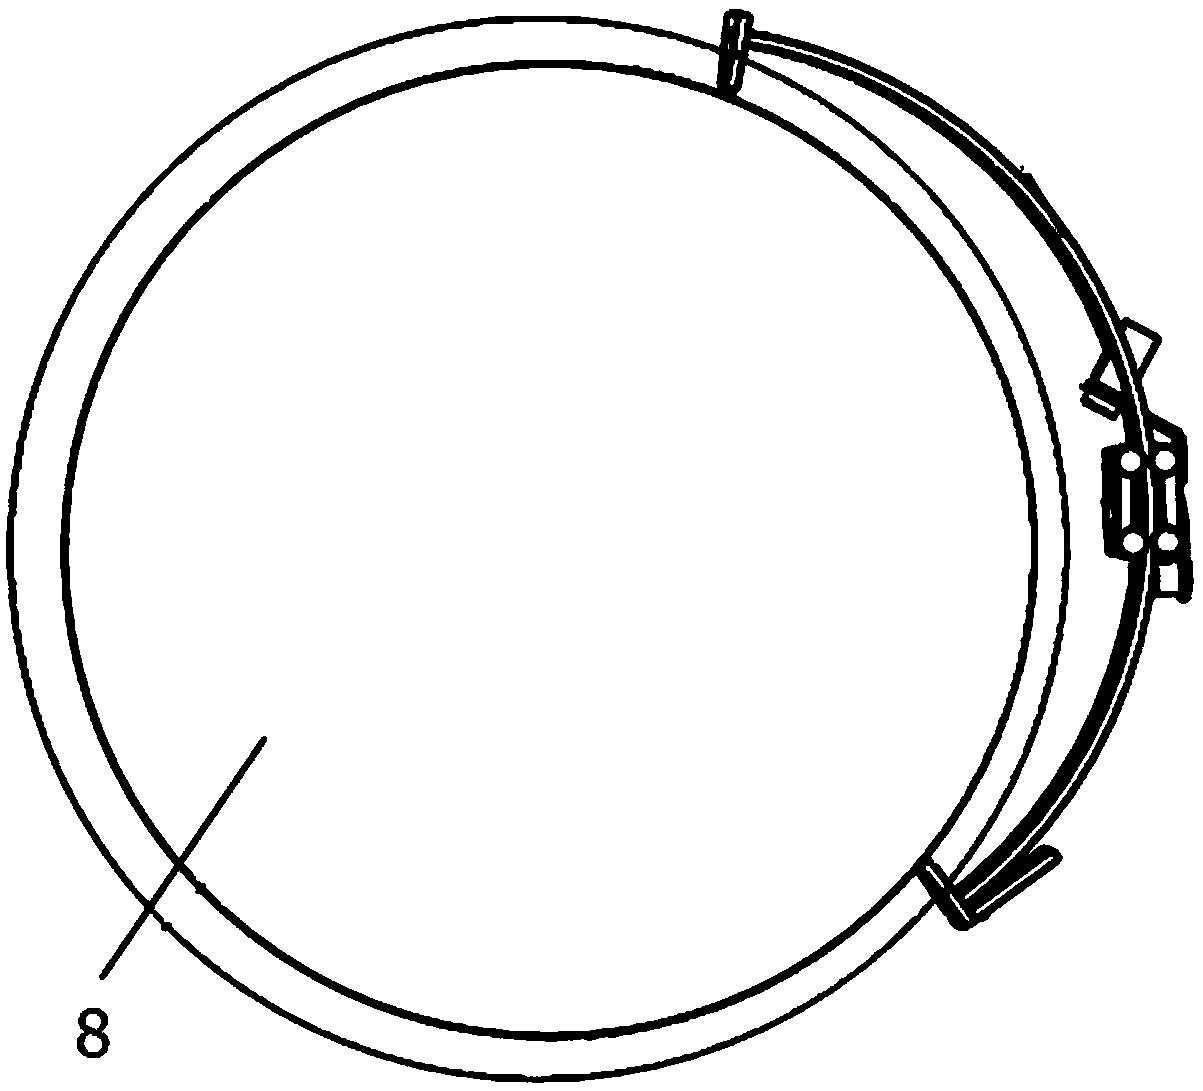 Parameter detection device and system for portable subway wheel pairs